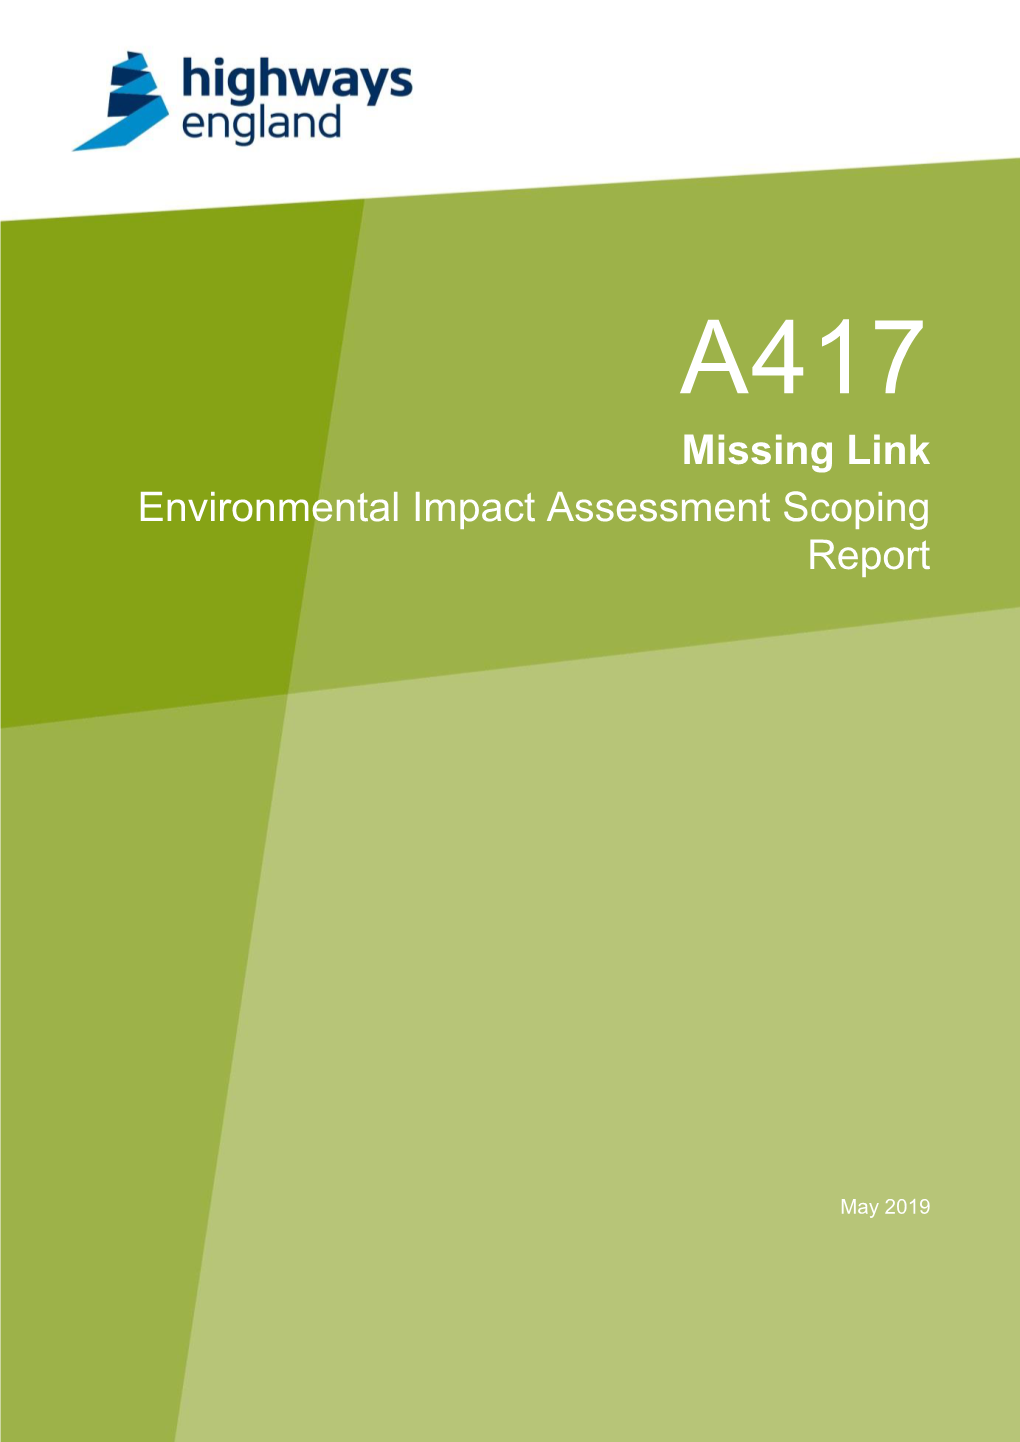 Missing Link Environmental Impact Assessment Scoping Report